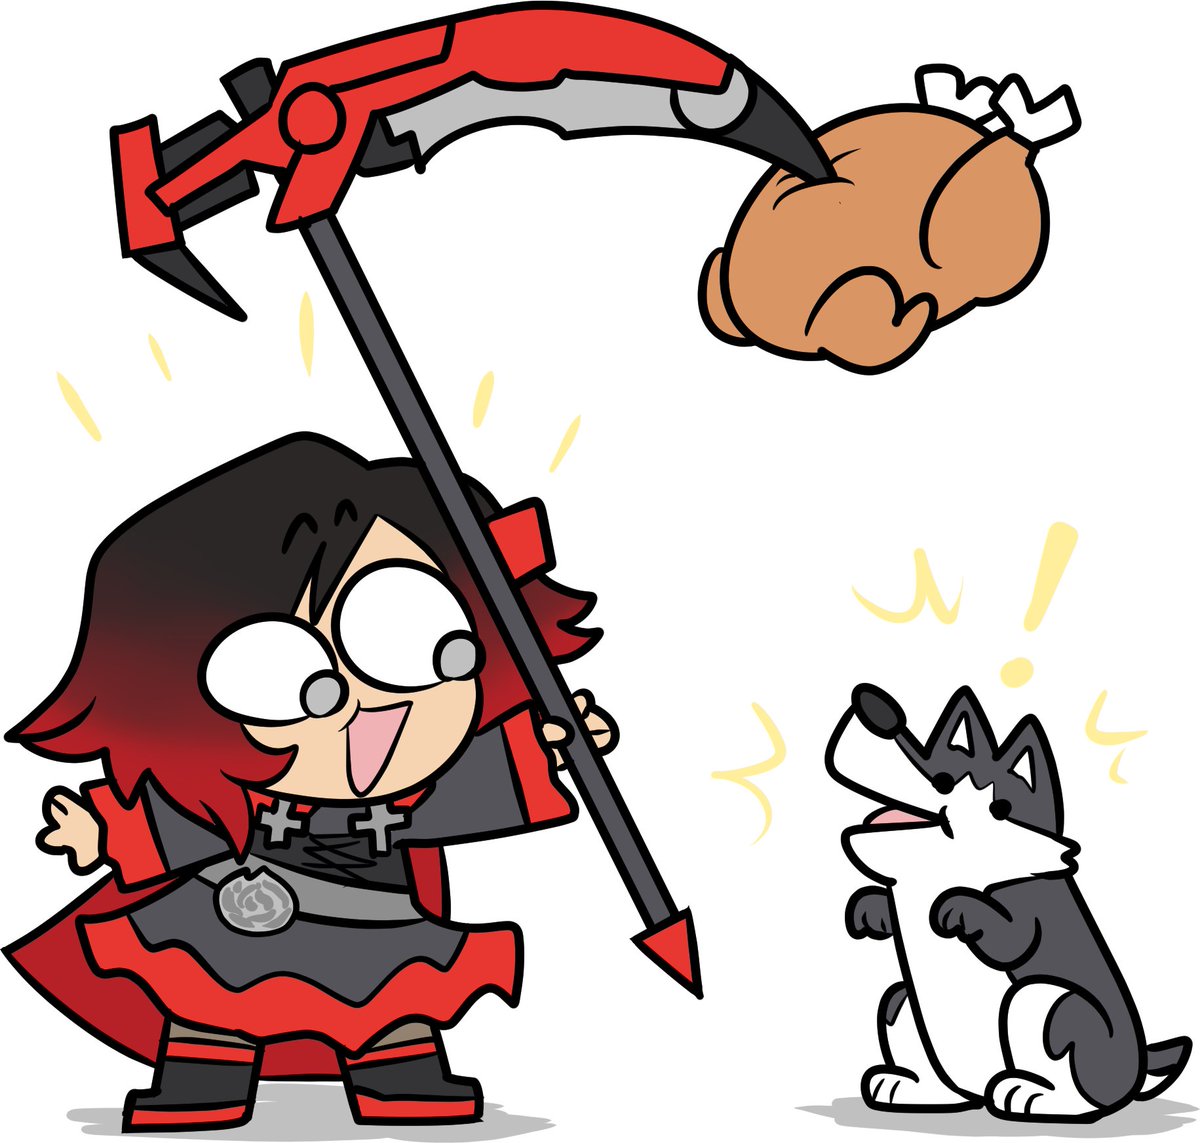 it's ruby (and zwei!)

Drawing is based on that scene from DumbRWBY

who else wants to draw stuff for #RWBYColoursOfMay

#RWBYfanart